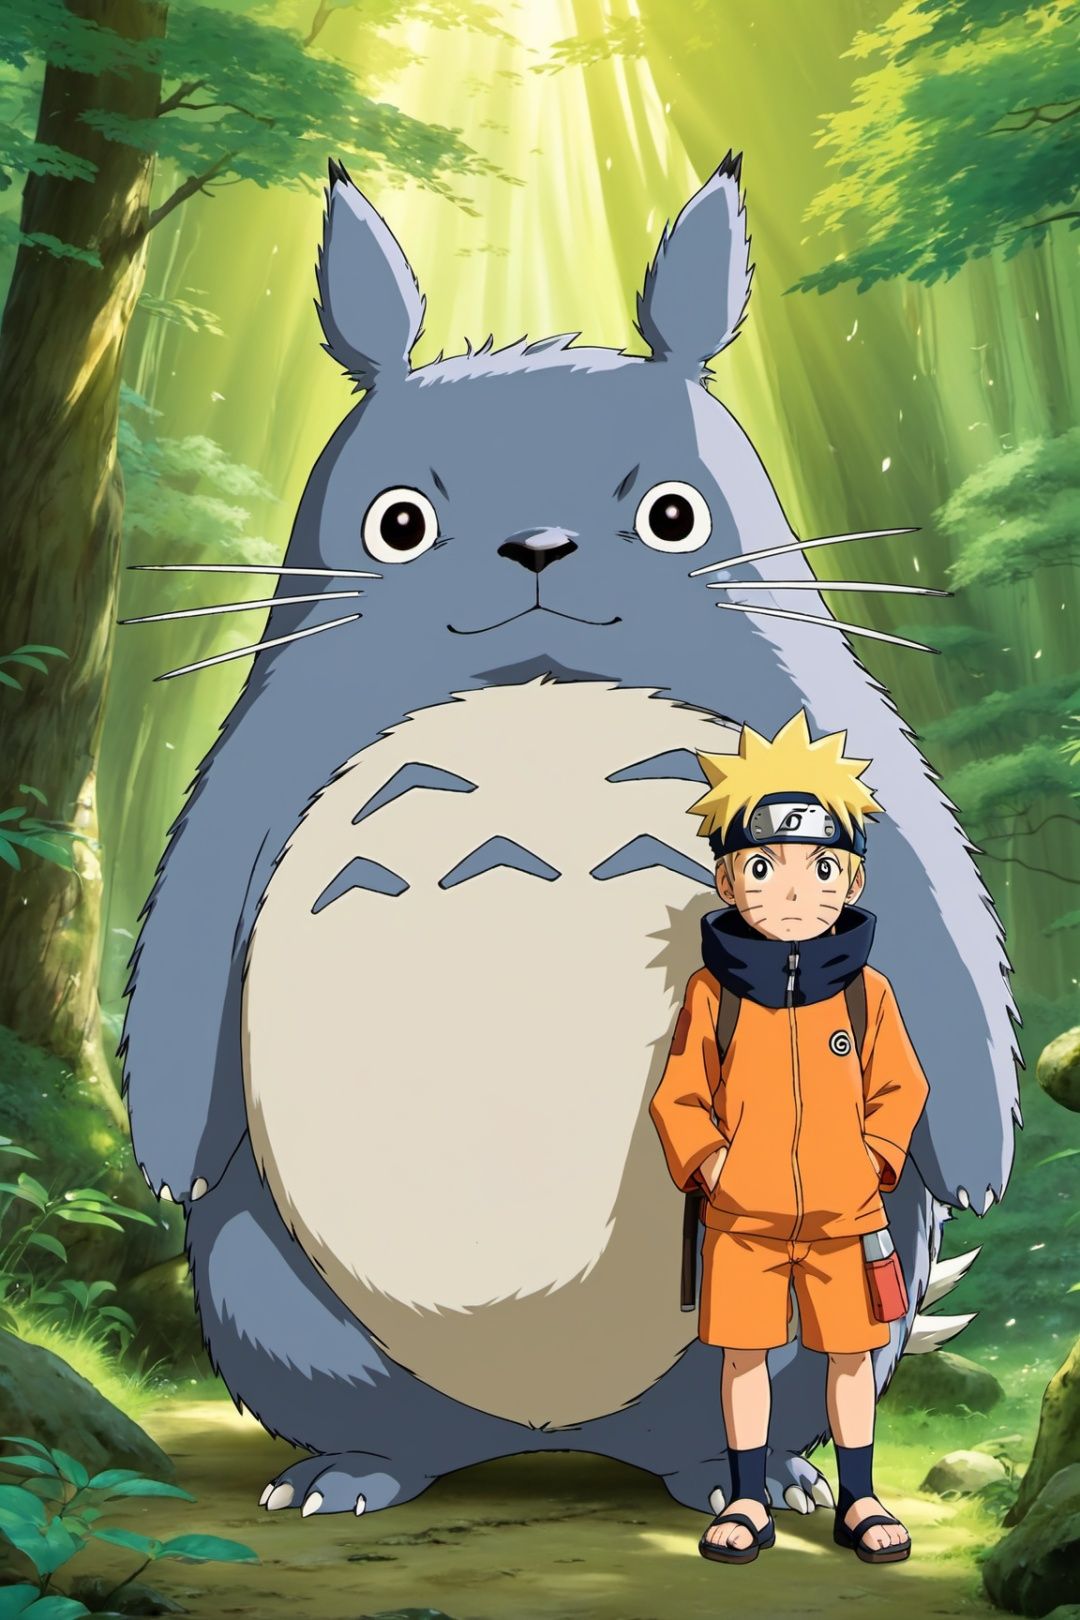  Ghibli artwork Totoro and Naruto Naruto together, dramatic, critical visual, dynamic, highly detailed, studio animation, animated colors, pallas's cat